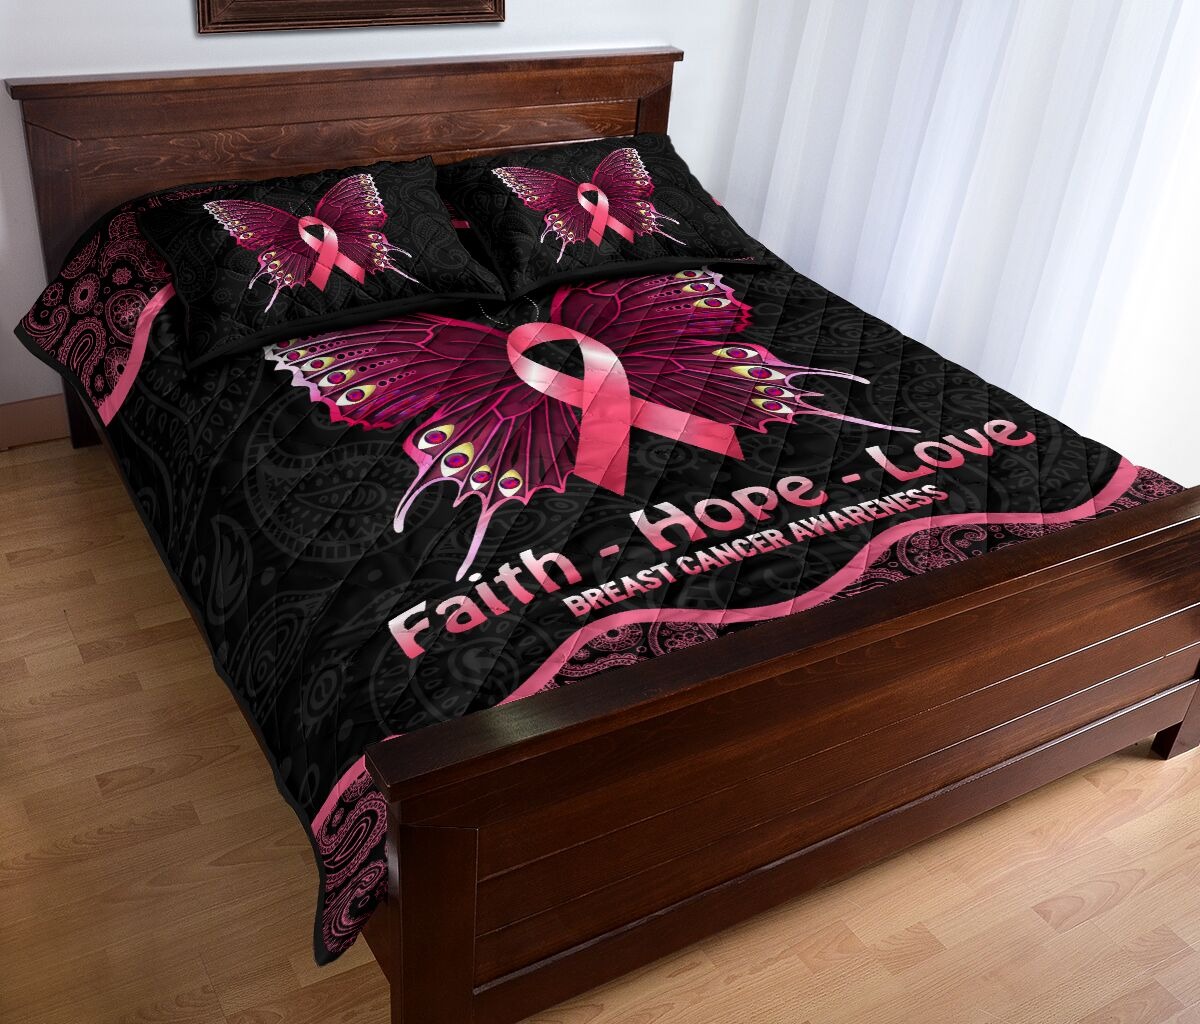 Butterfly faith hope love breast cancer awareness quilt bedding set2